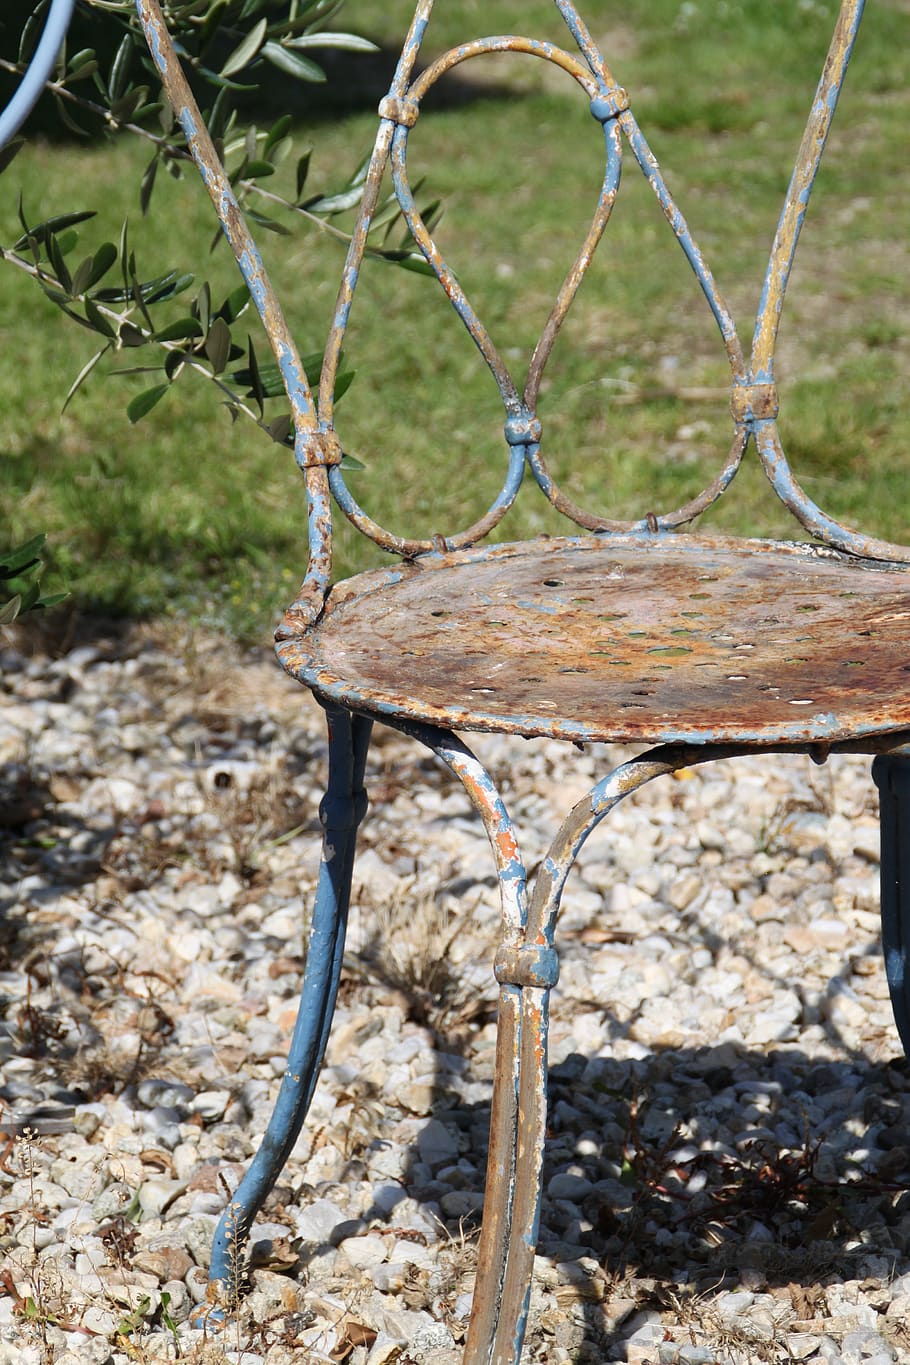 chair old, metal chair, chair garden, chair, metal, decoration, vintage, antique chairs, decor, empty chairs